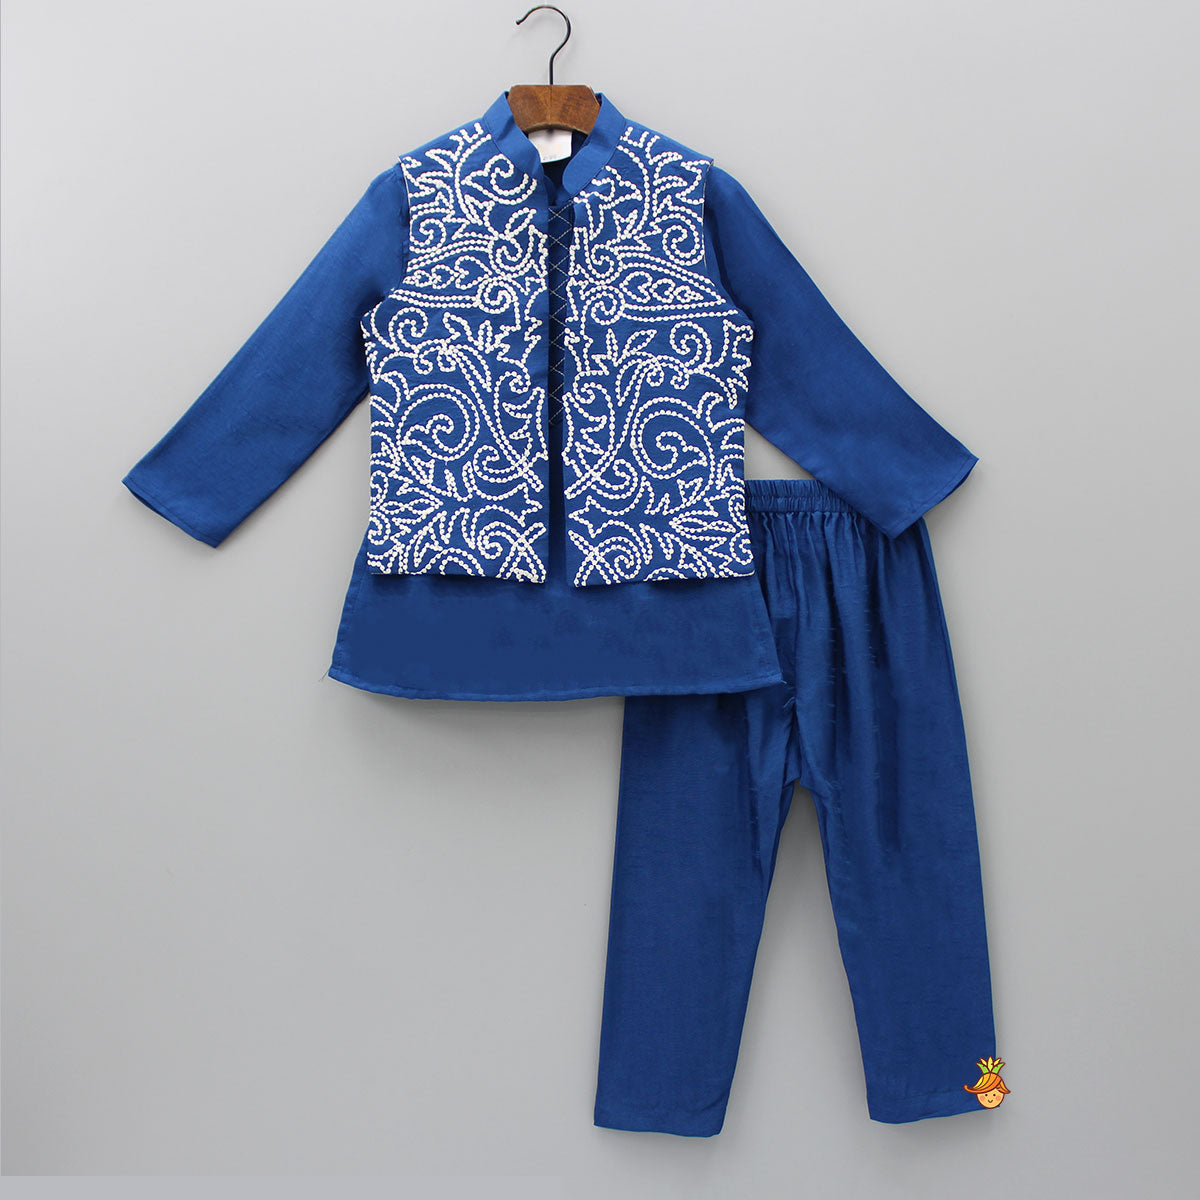 Pre Order: Silk Embroidered Front Placket Cobalt Blue Kurta With Sleeveless Open Jacket And Pyjama